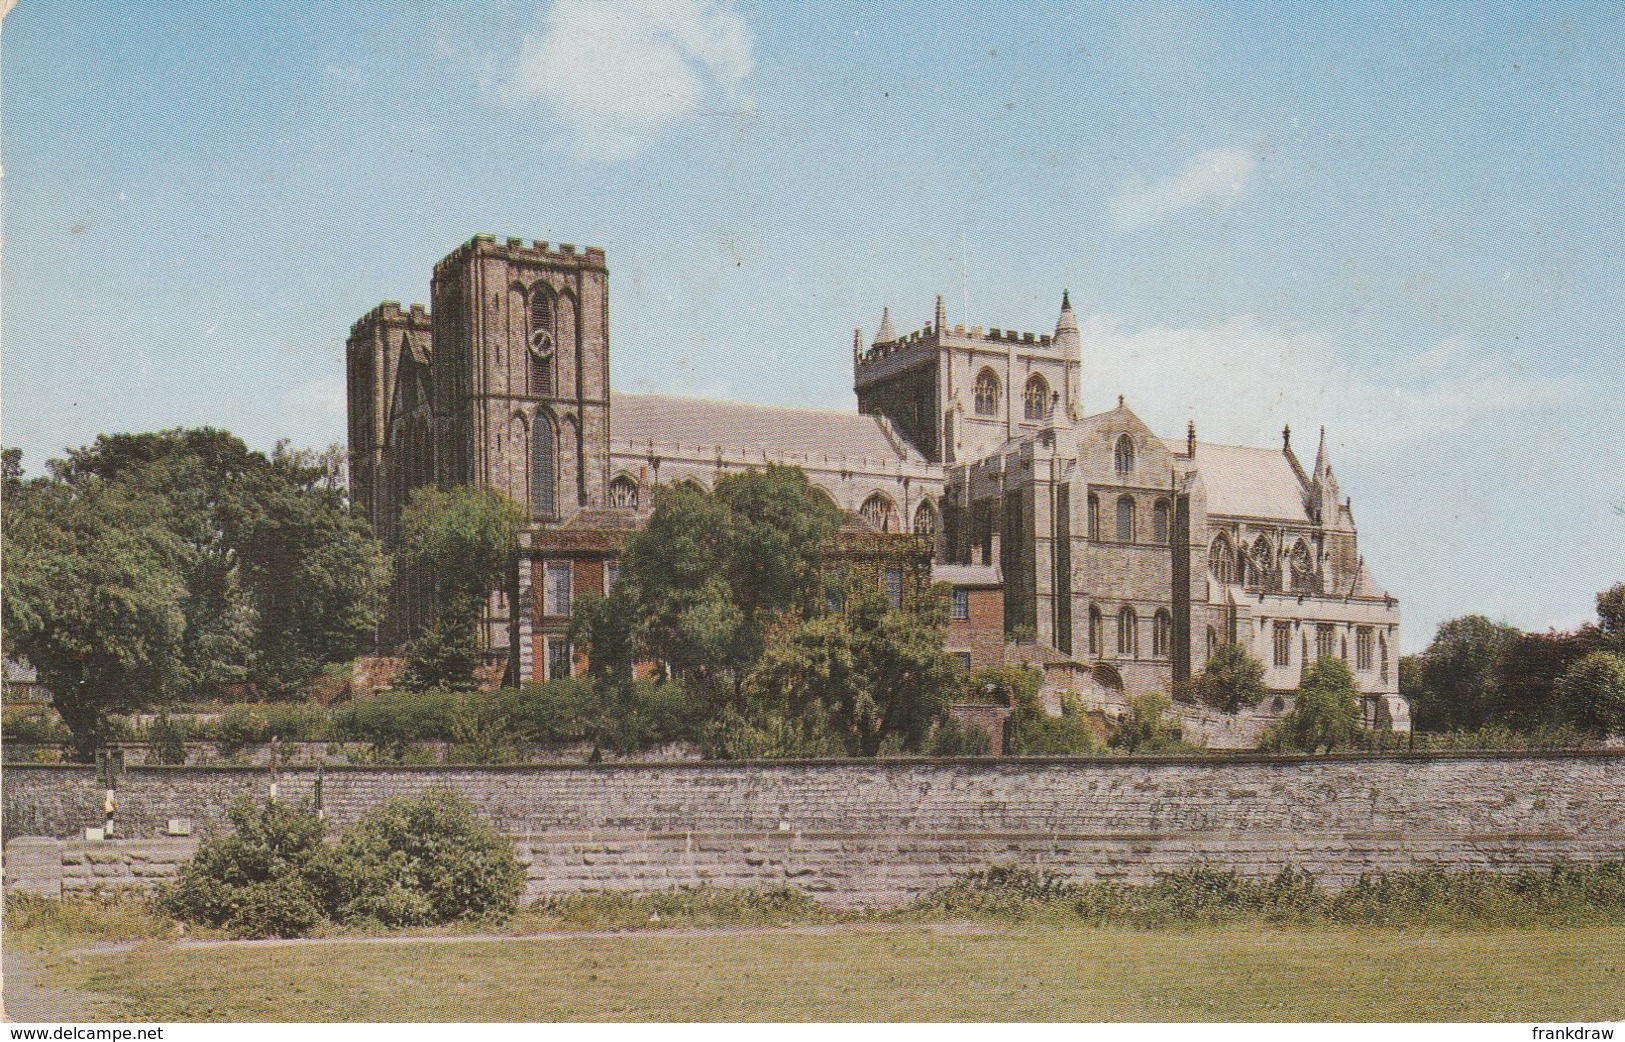 Postcard - The Cathedral, Ripon No Card No. Posted  19th Aug 1966 Very Good - Harrogate